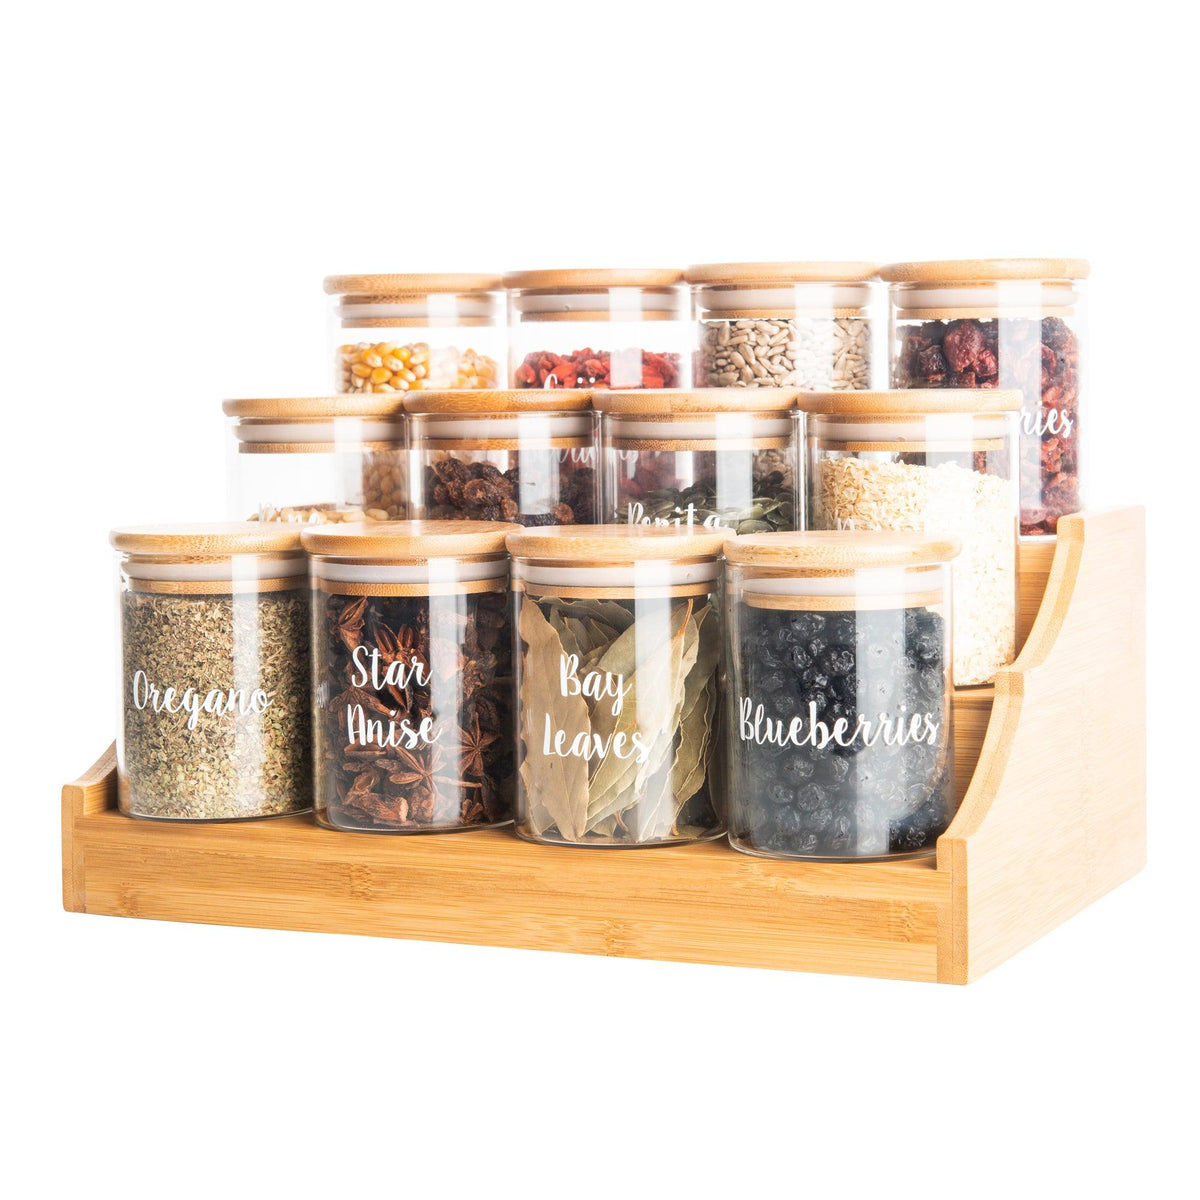 https://www.littlelabelco.com/cdn/shop/files/large-bamboo-spice-shelf-with-12-x-200ml-herb-and-spice-jars-pack-little-label-co-1_36801236-3475-4188-abd3-dcefc1d832c4_1200x1200.jpg?v=1689923442